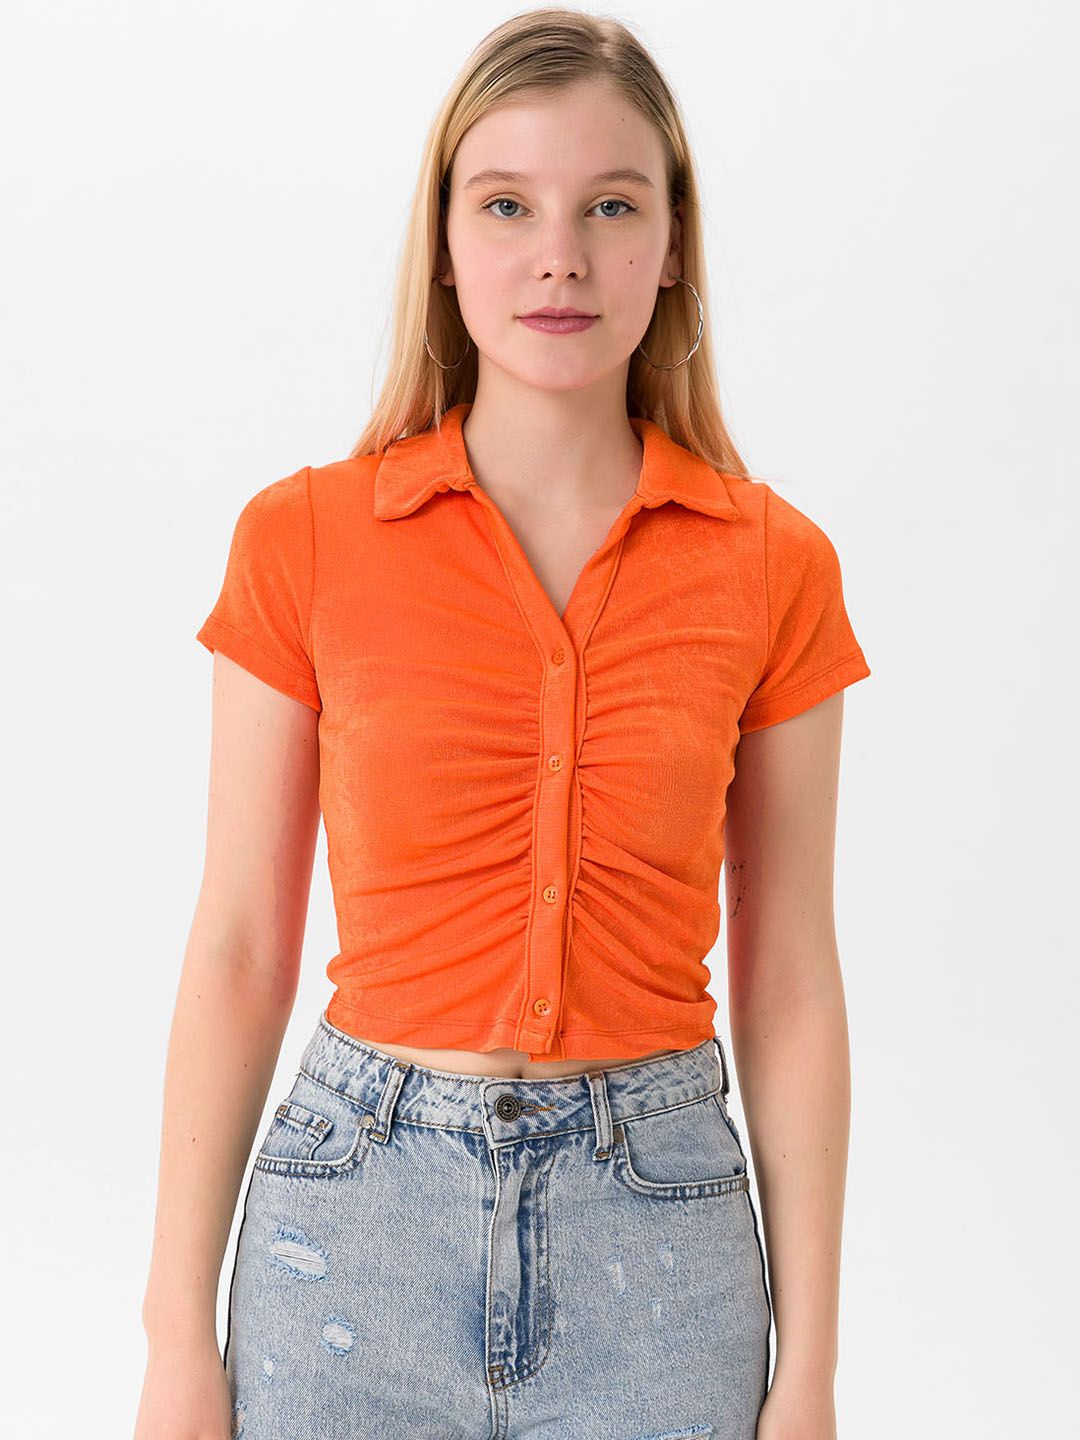 busem Orange Ruched Shirt Style Crop Top Price in India